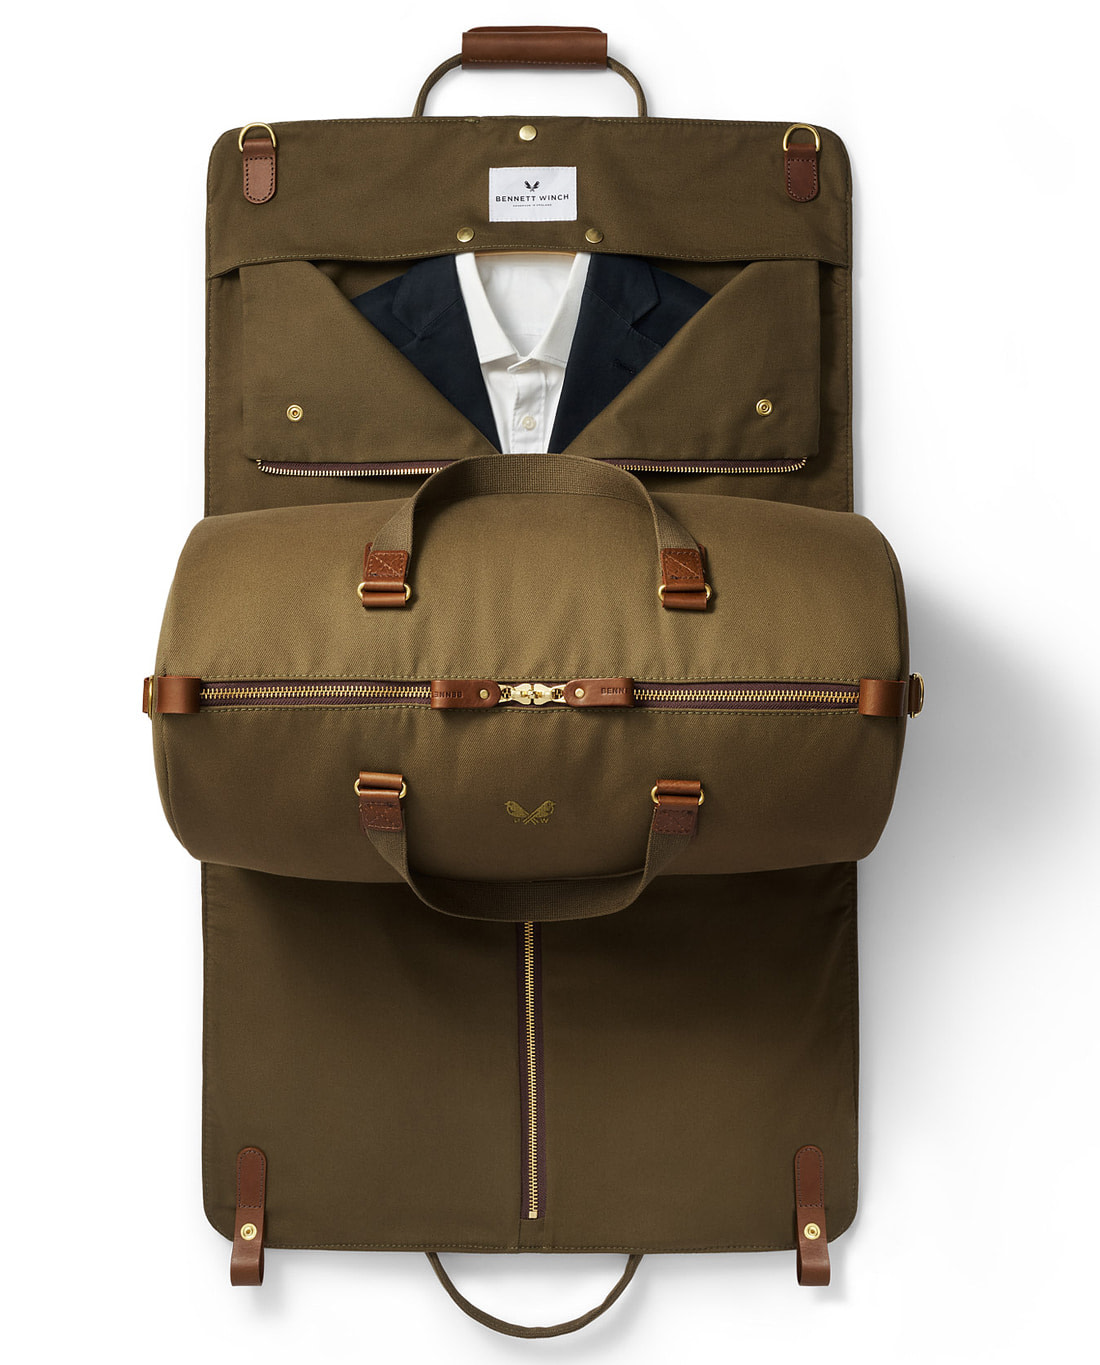 Easy Hook Garment Bags For Your Most Cherished Suits